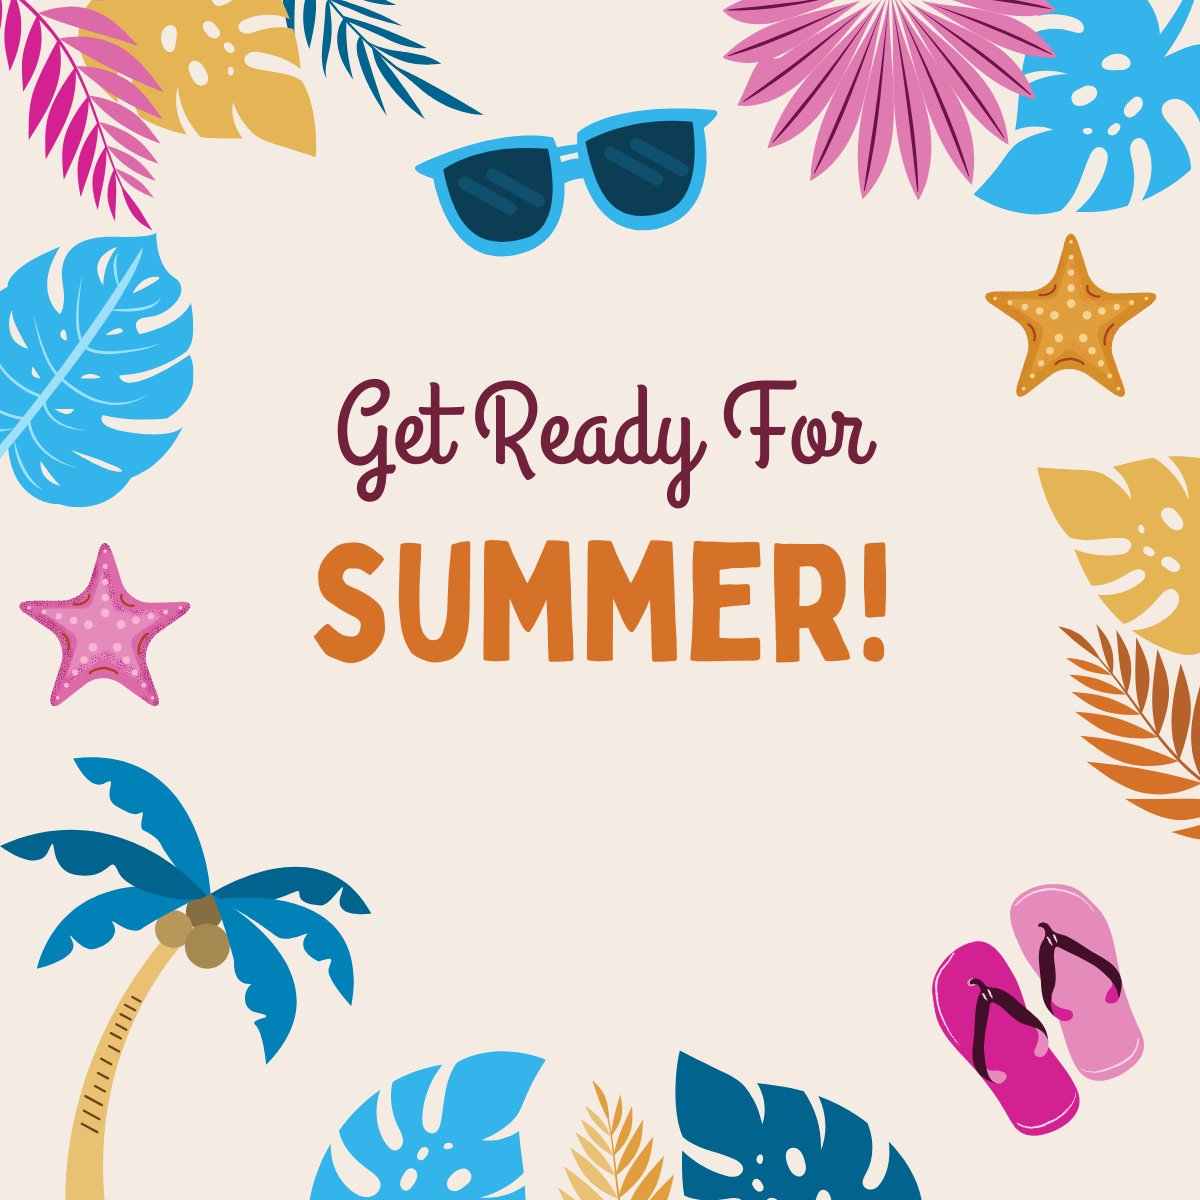 Our latest blog is a reminder that planning ahead for your Summer events can ease a LOT of stress!

lb-creative.co.uk/enjoy-a-succes…

#SummerEvents #EventPromotion #CreativeDesign #GraphicDesign #Copywriting #CreativeDesignAgency